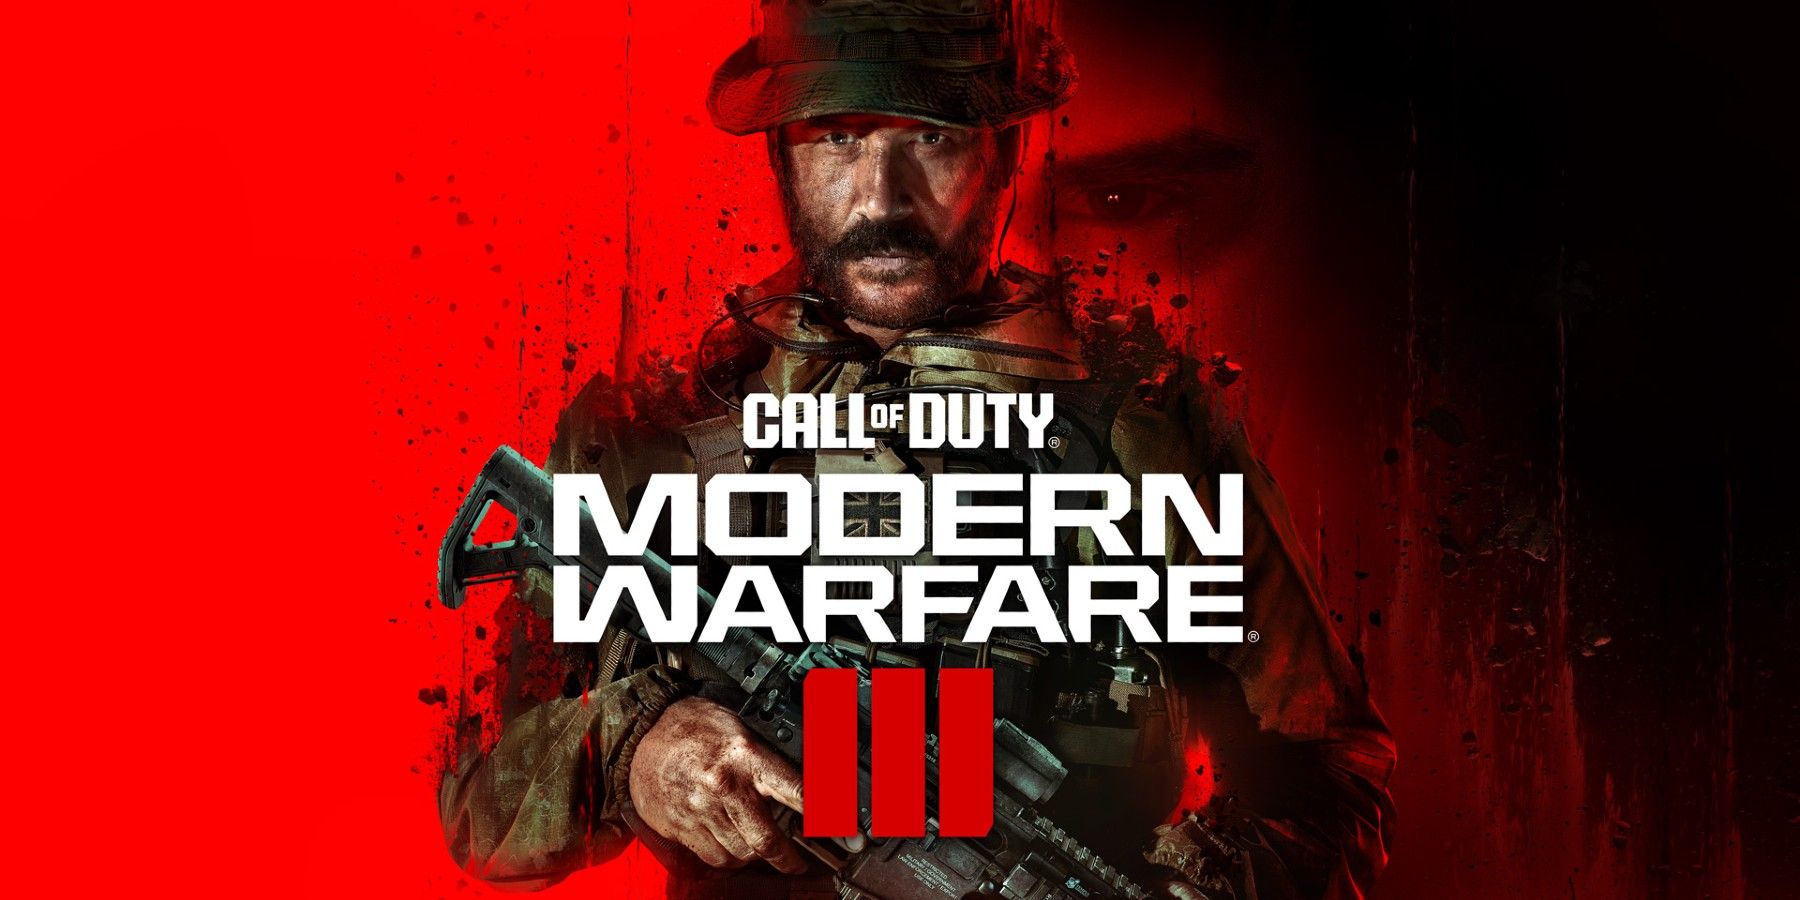 New Call of Duty Modern Warfare 3 Operator Is Exclusive to PlayStation